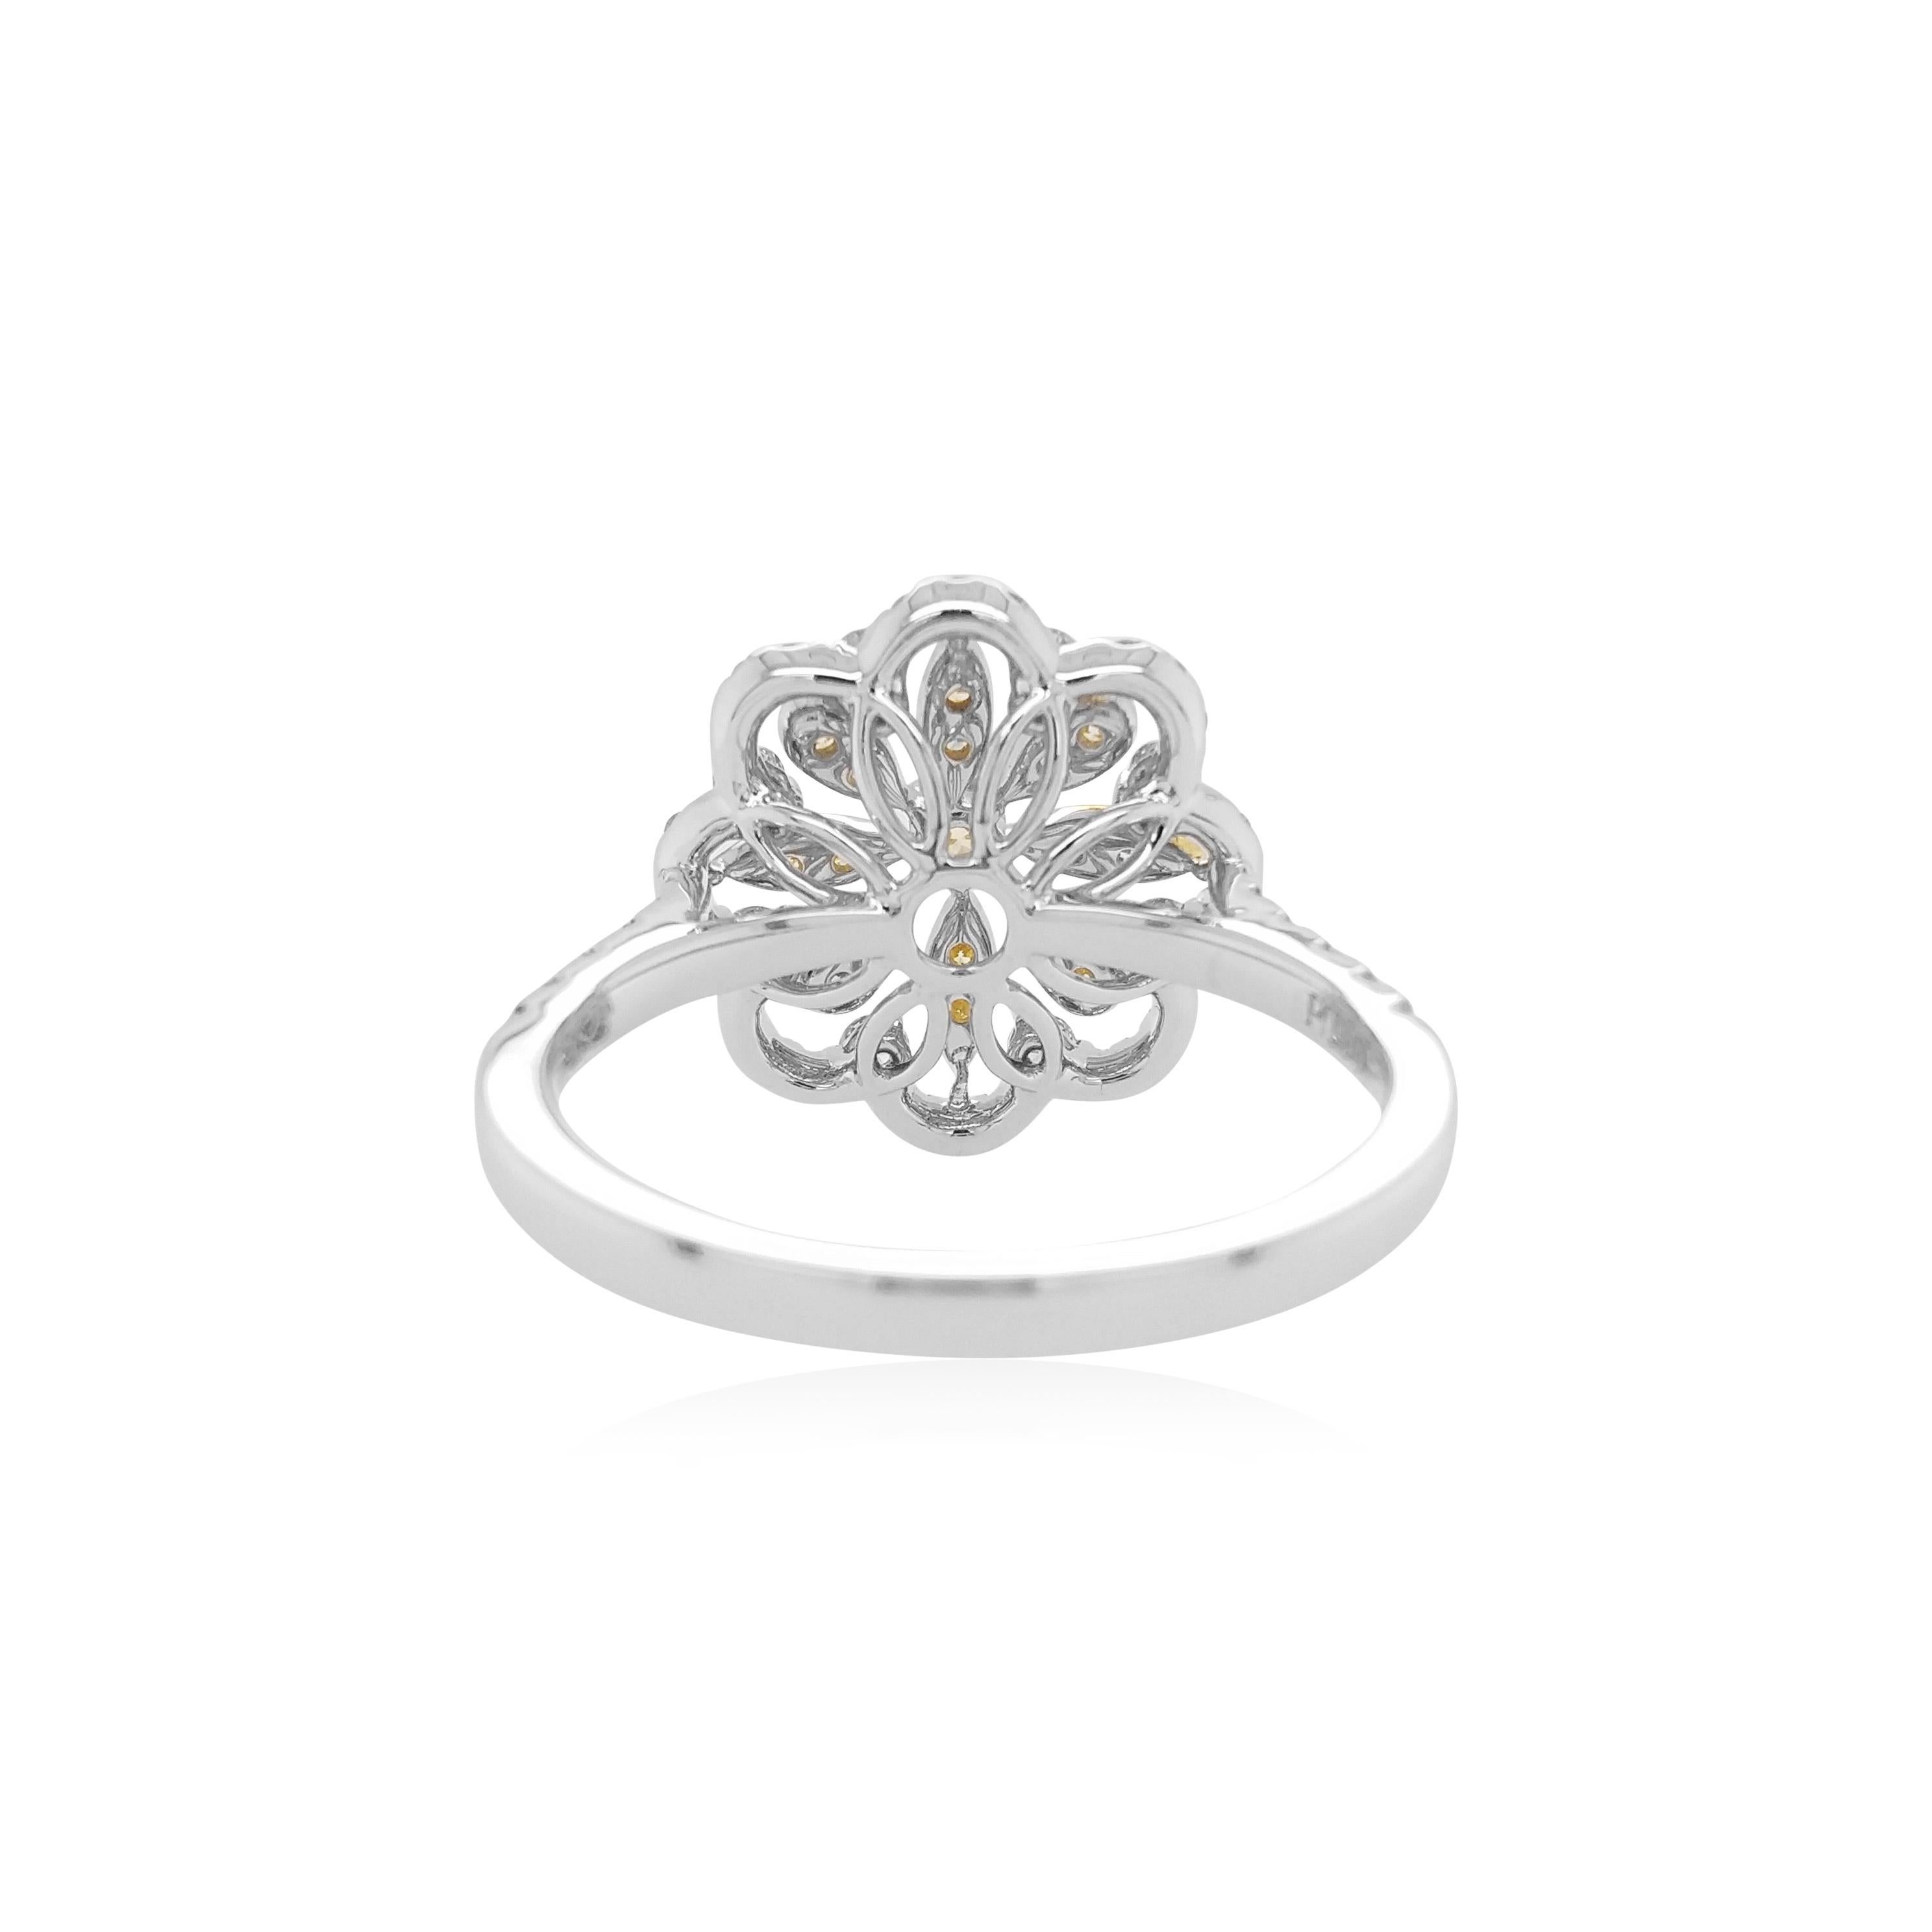 This unique flower shaped ring features natural Yellow diamonds at the heart of the design. The rich colour of these diamonds is complimented perfectly by the delicate platinum floral design which completed by a combination of round brilliant-cut